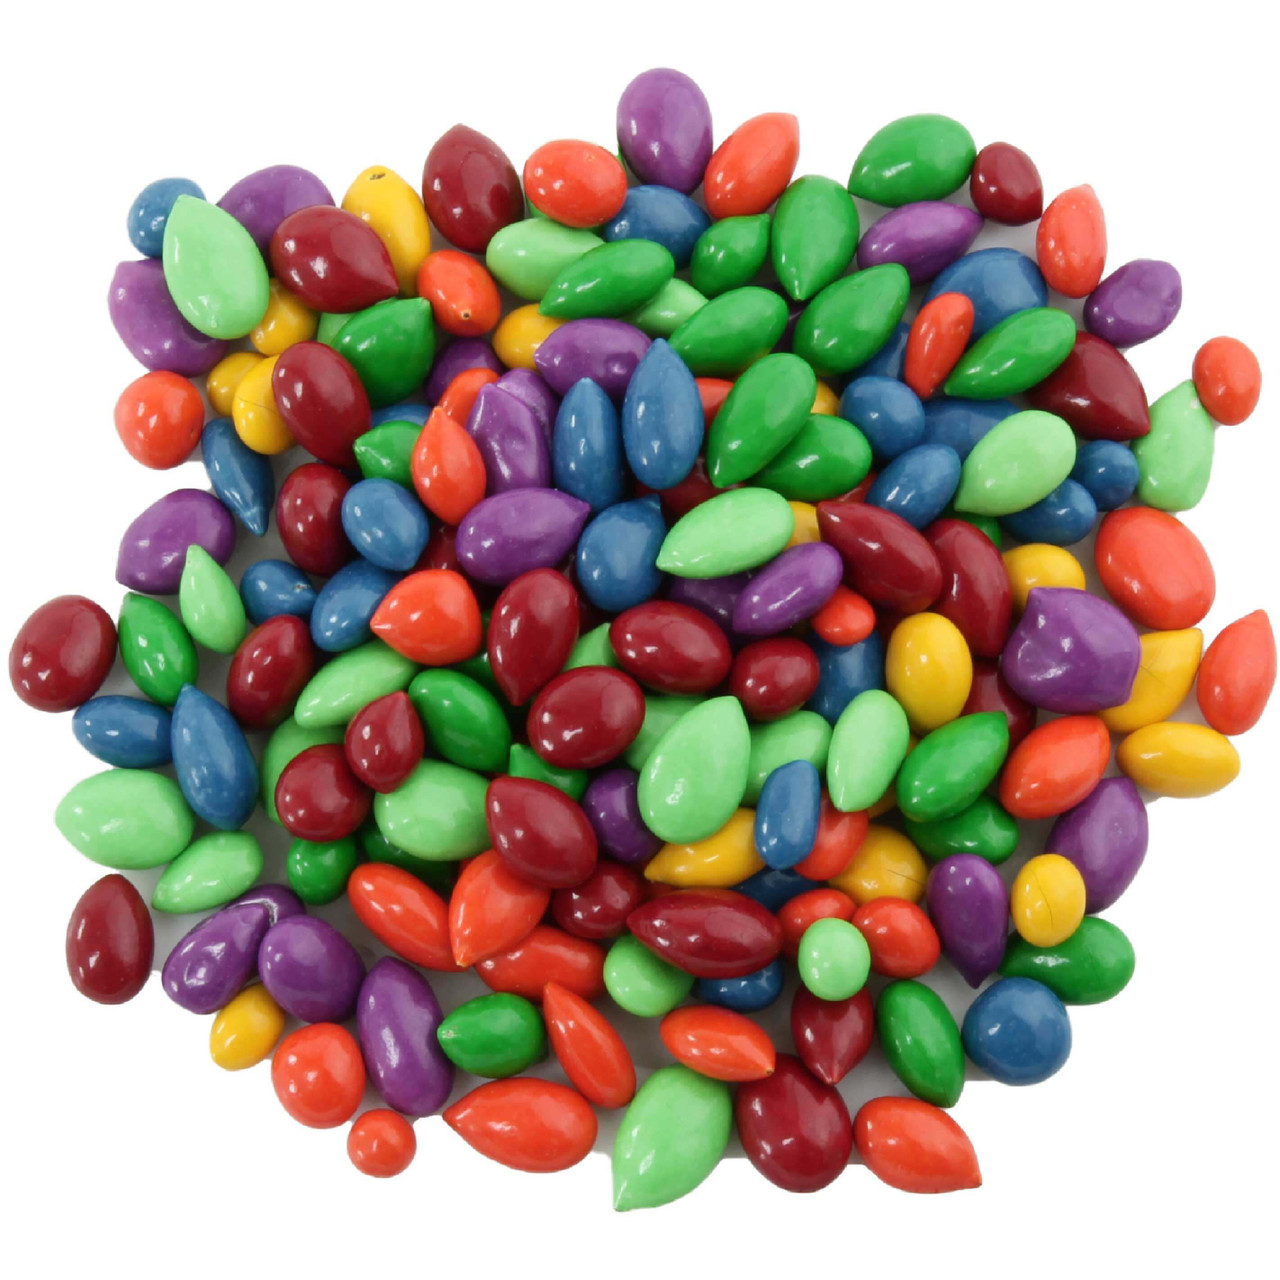 TOPPERS Chocolate Covered Sunflower Seed Candy Gems Topping - 10 lb - Chicken Pieces